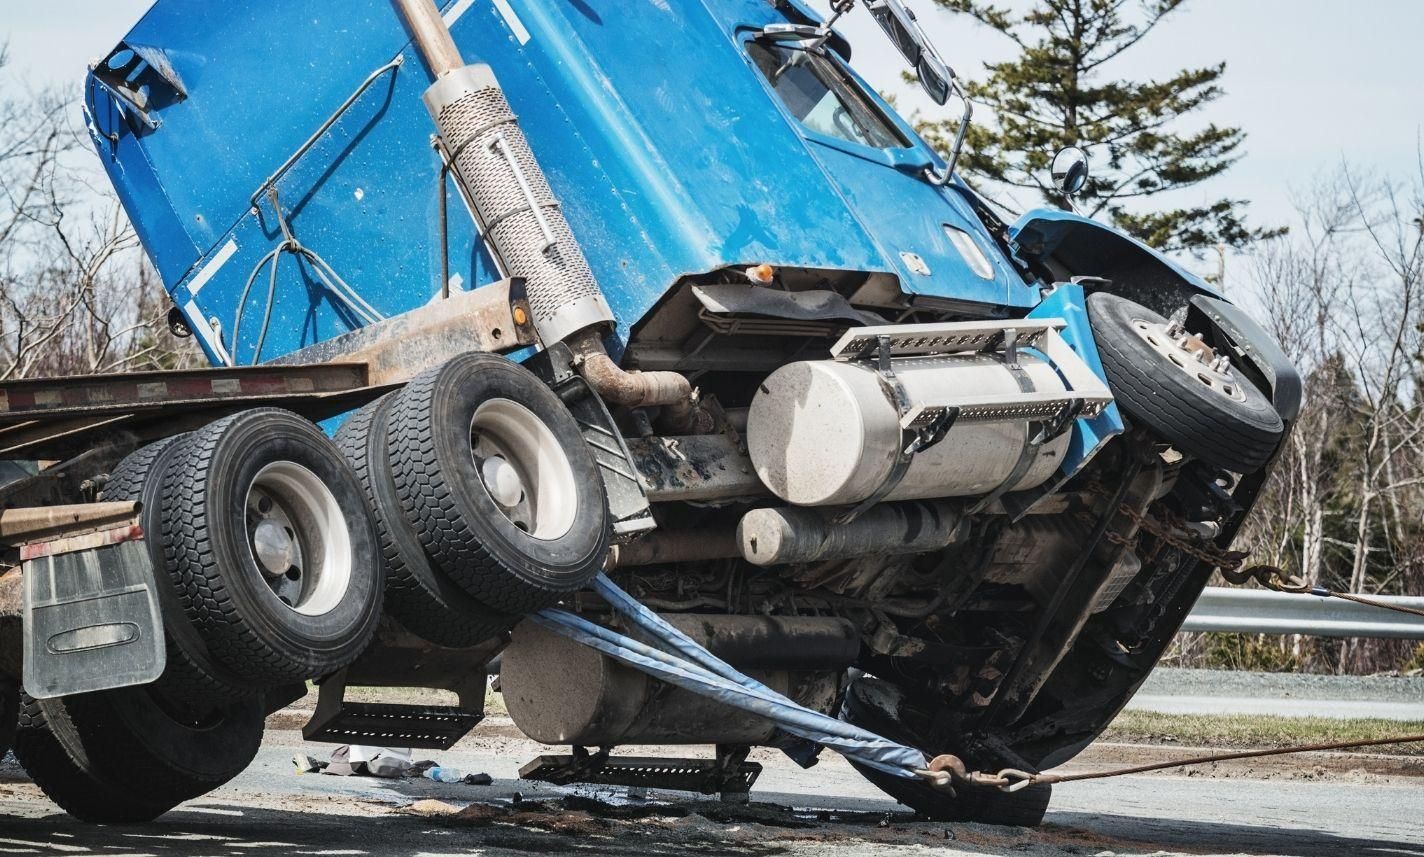 douglasville-commercial-truck-accident-injury-lawyer